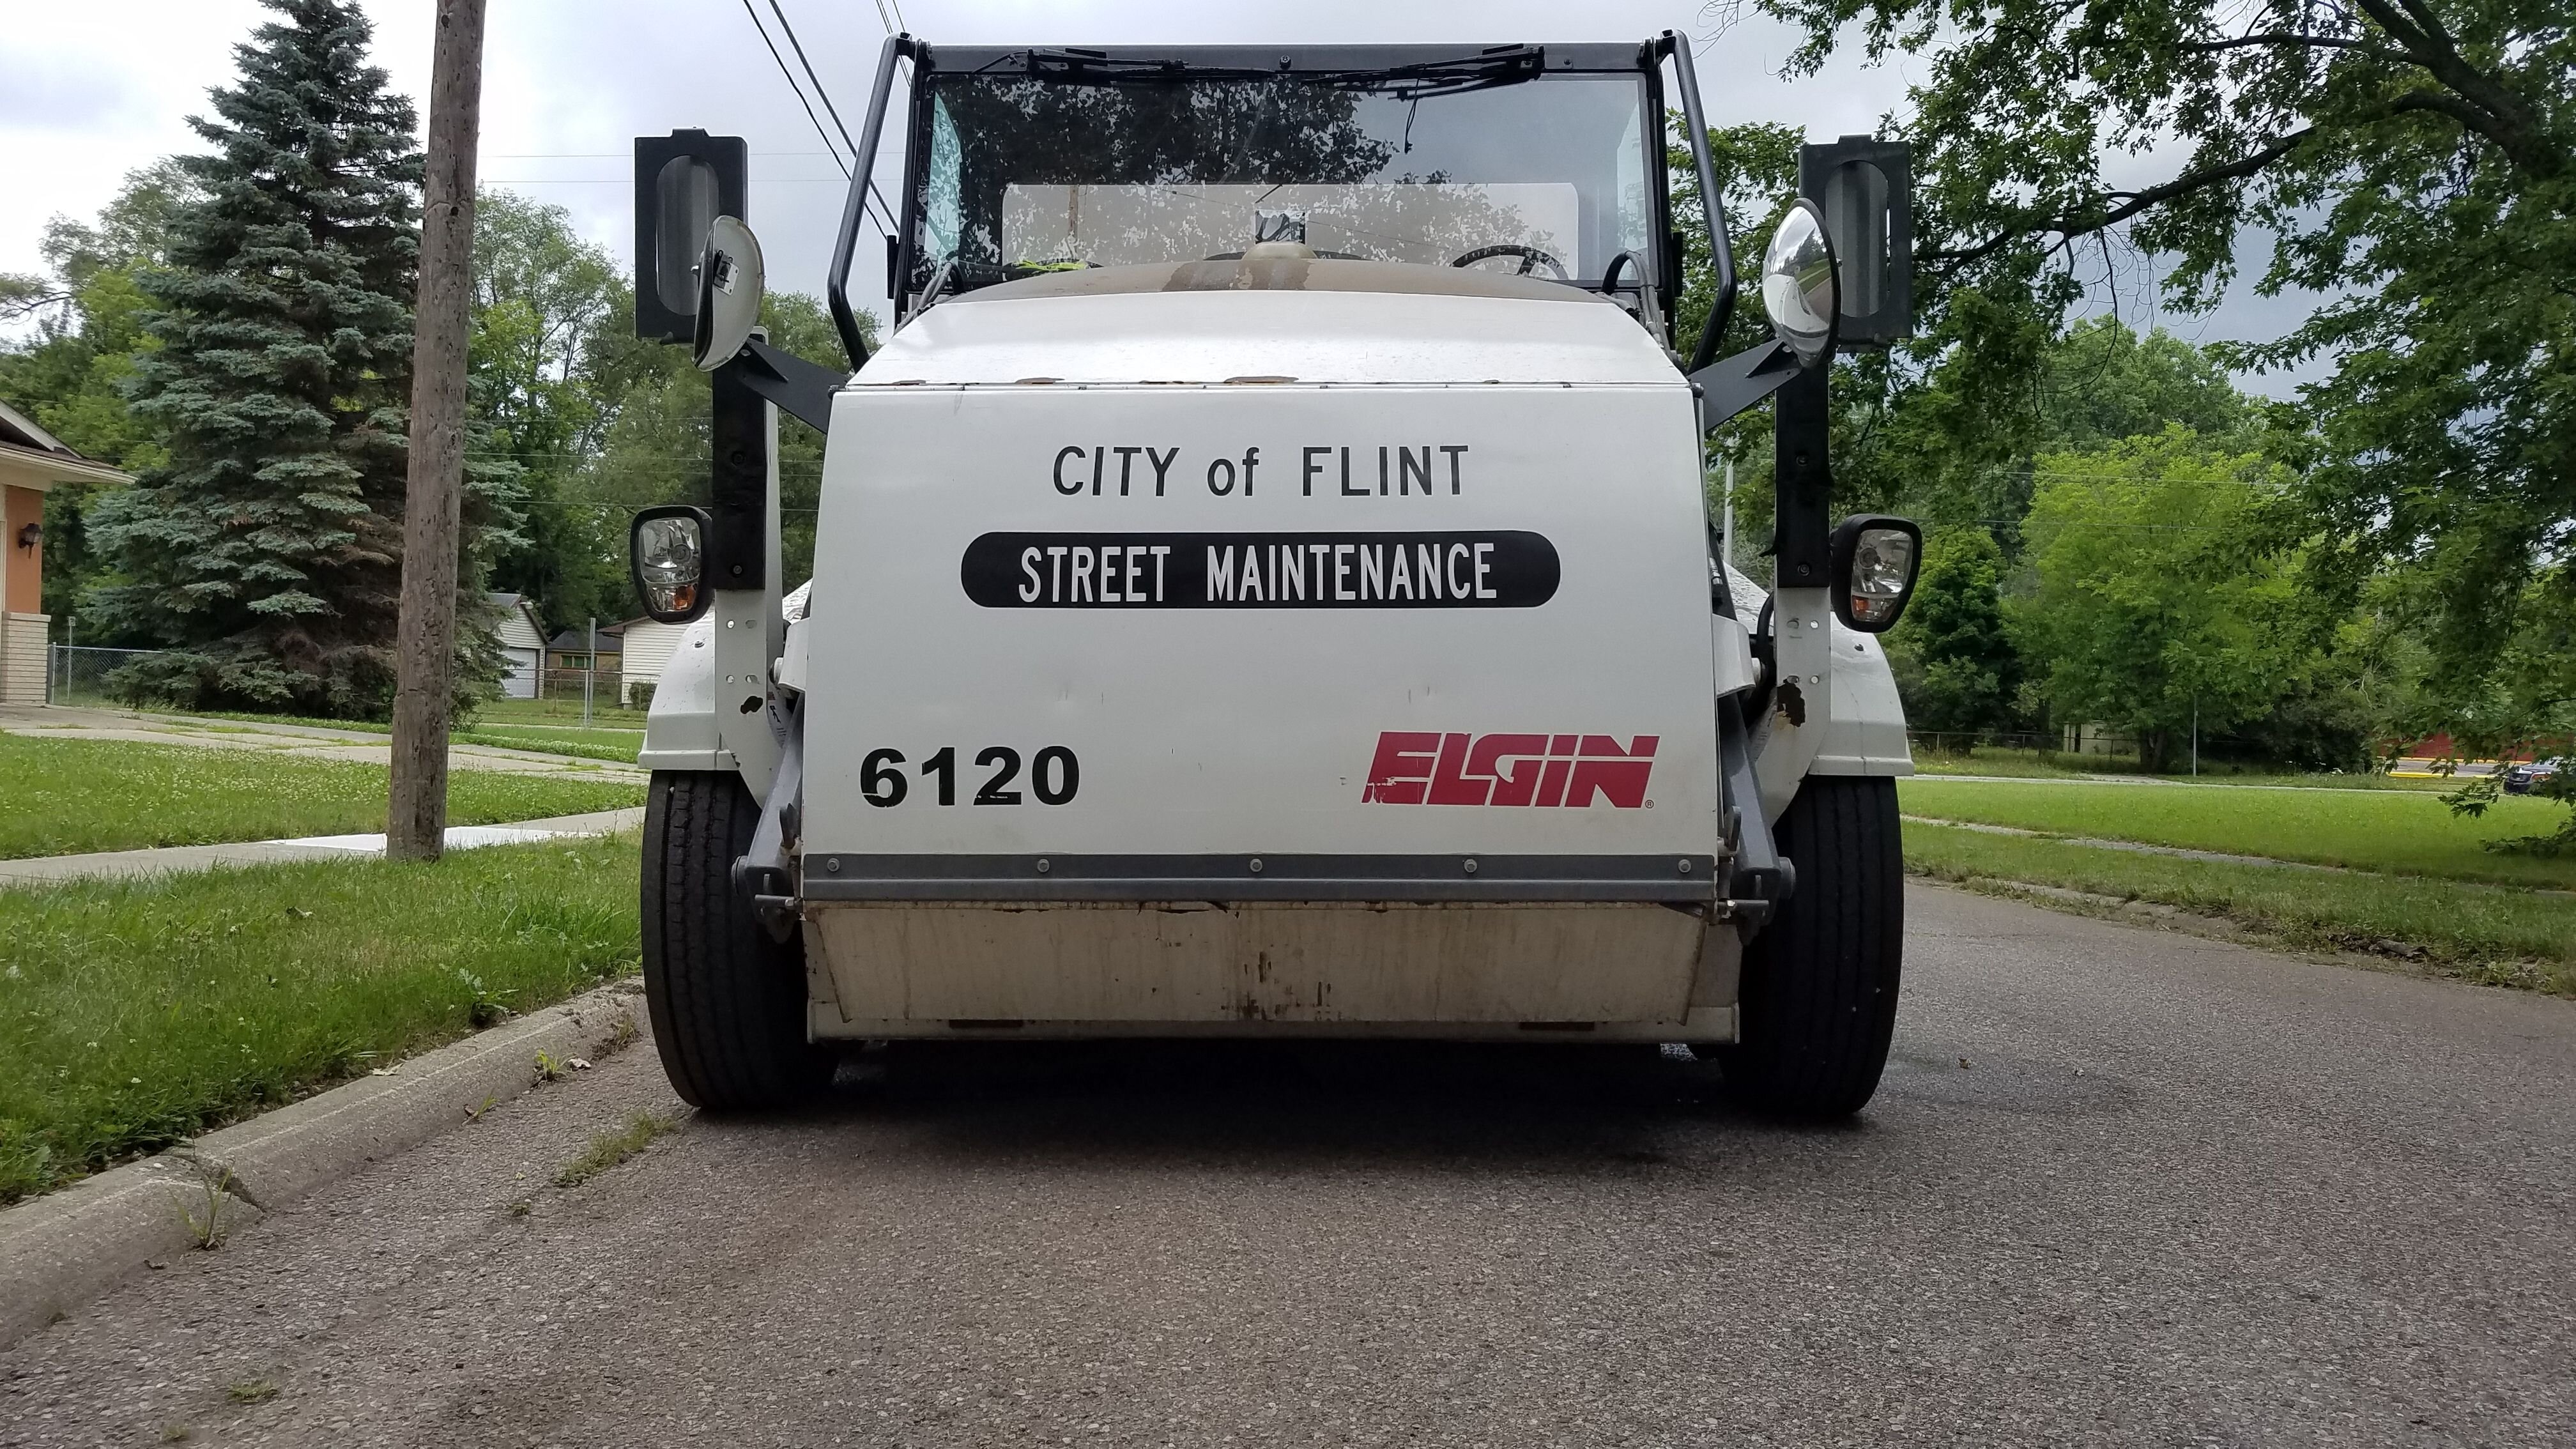 The city of Flint announced a plan to begin sweeping residential streets for the first time in seven years.